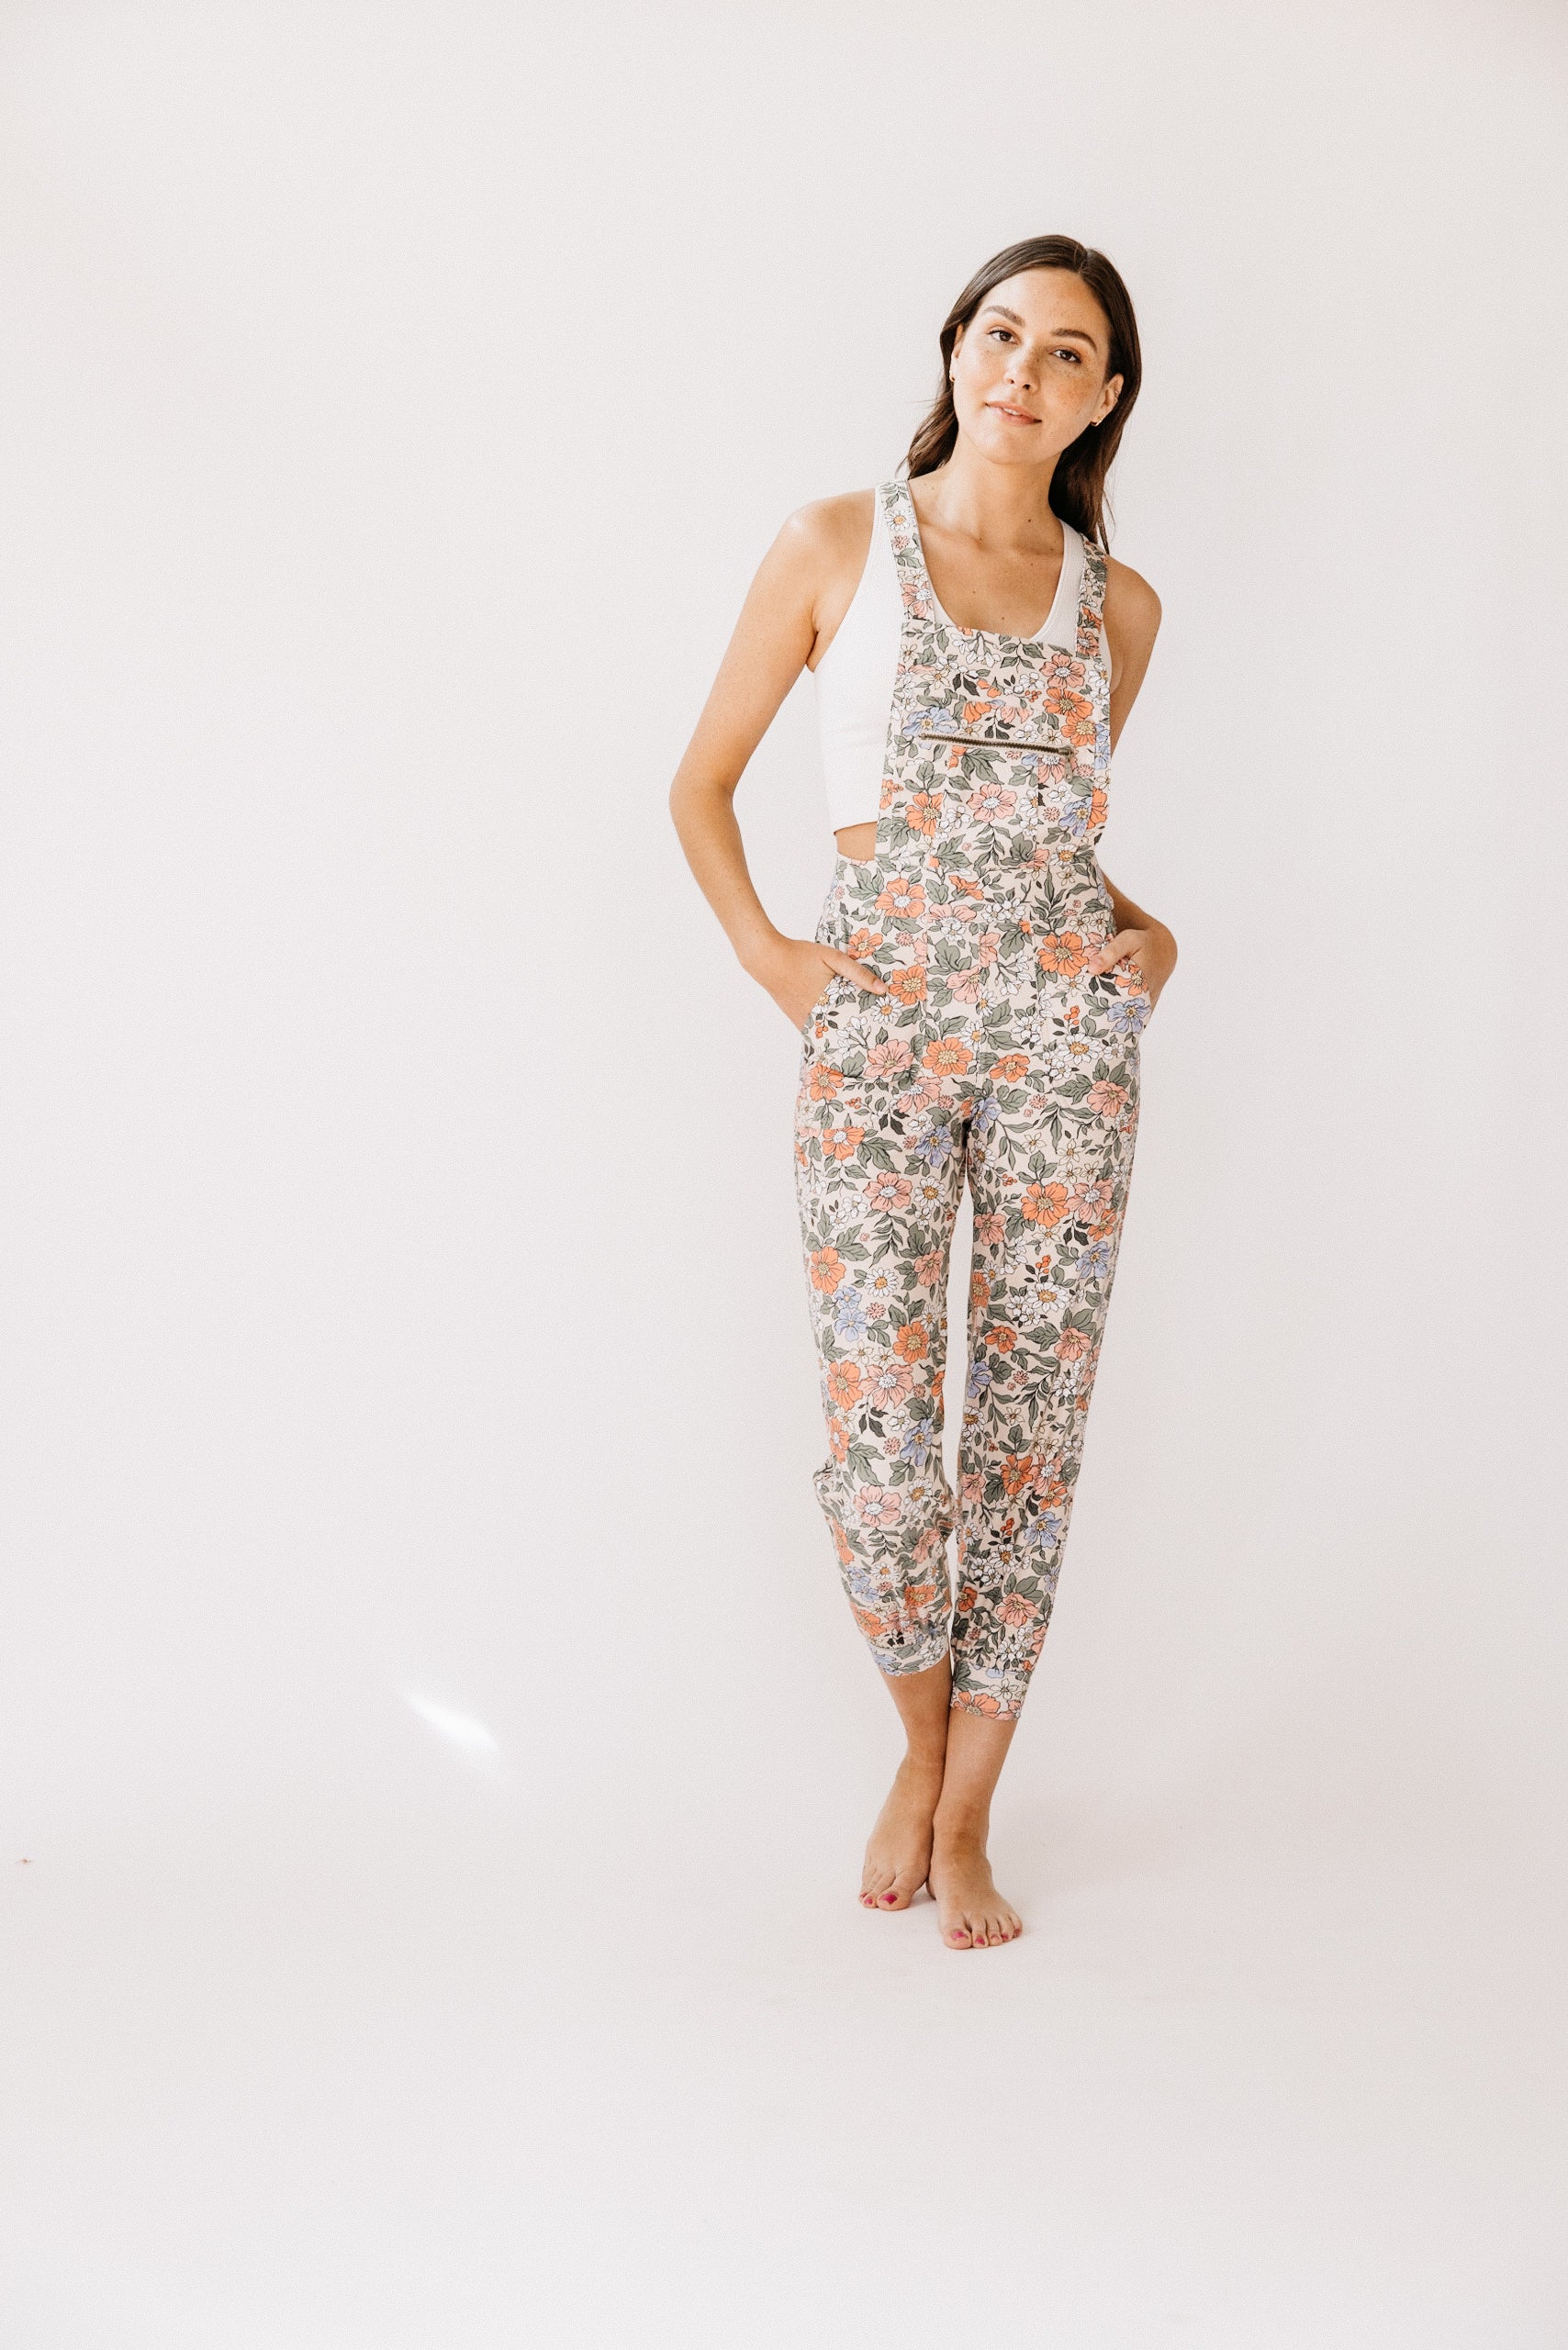 ASOS DESIGN Tall Skinny Joggers With Floral Print, $22, Asos